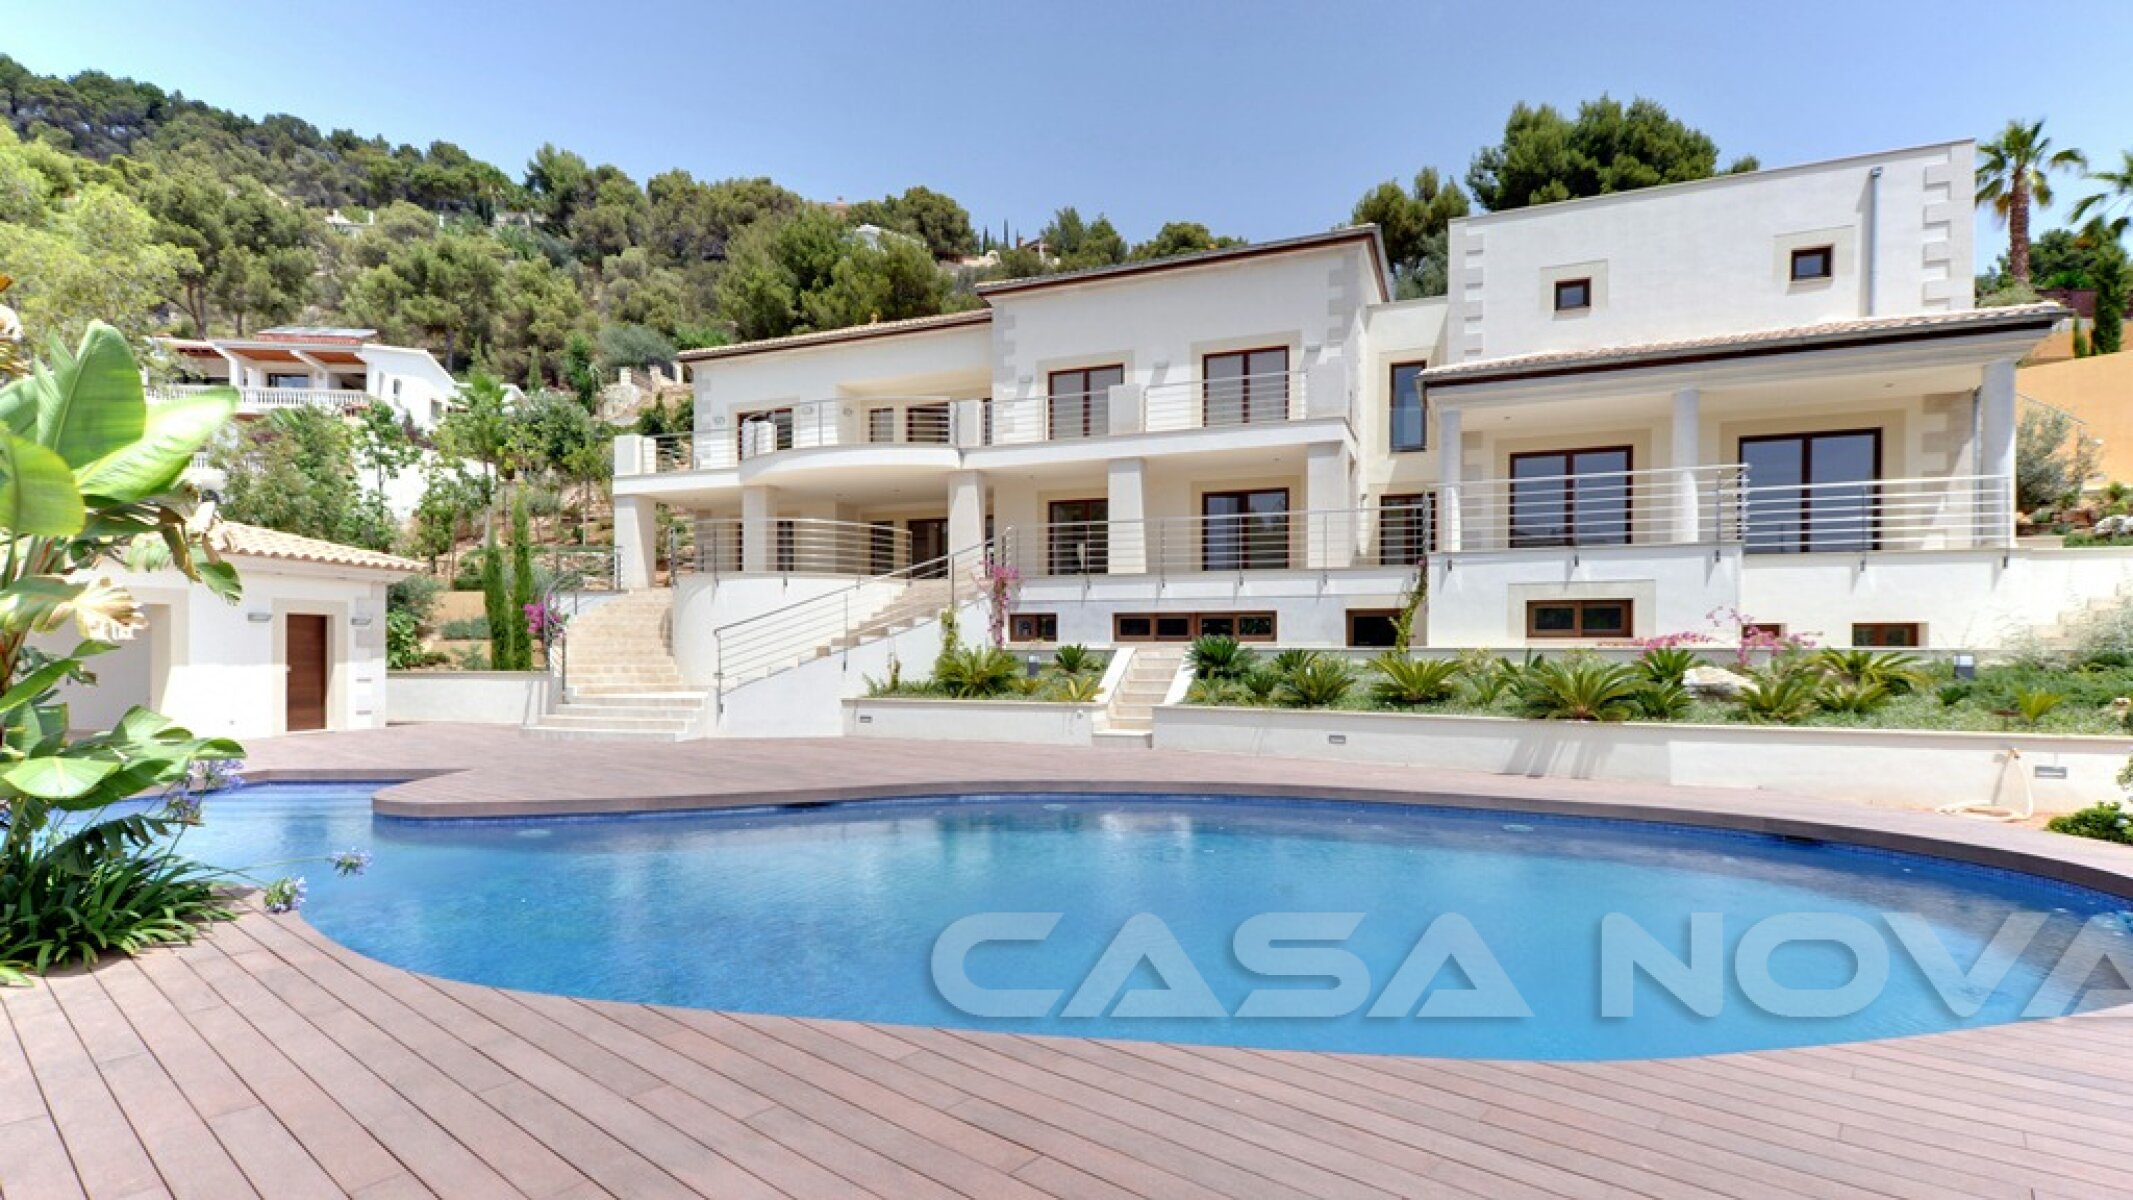 Majorca property with stunning pool and sun terraces